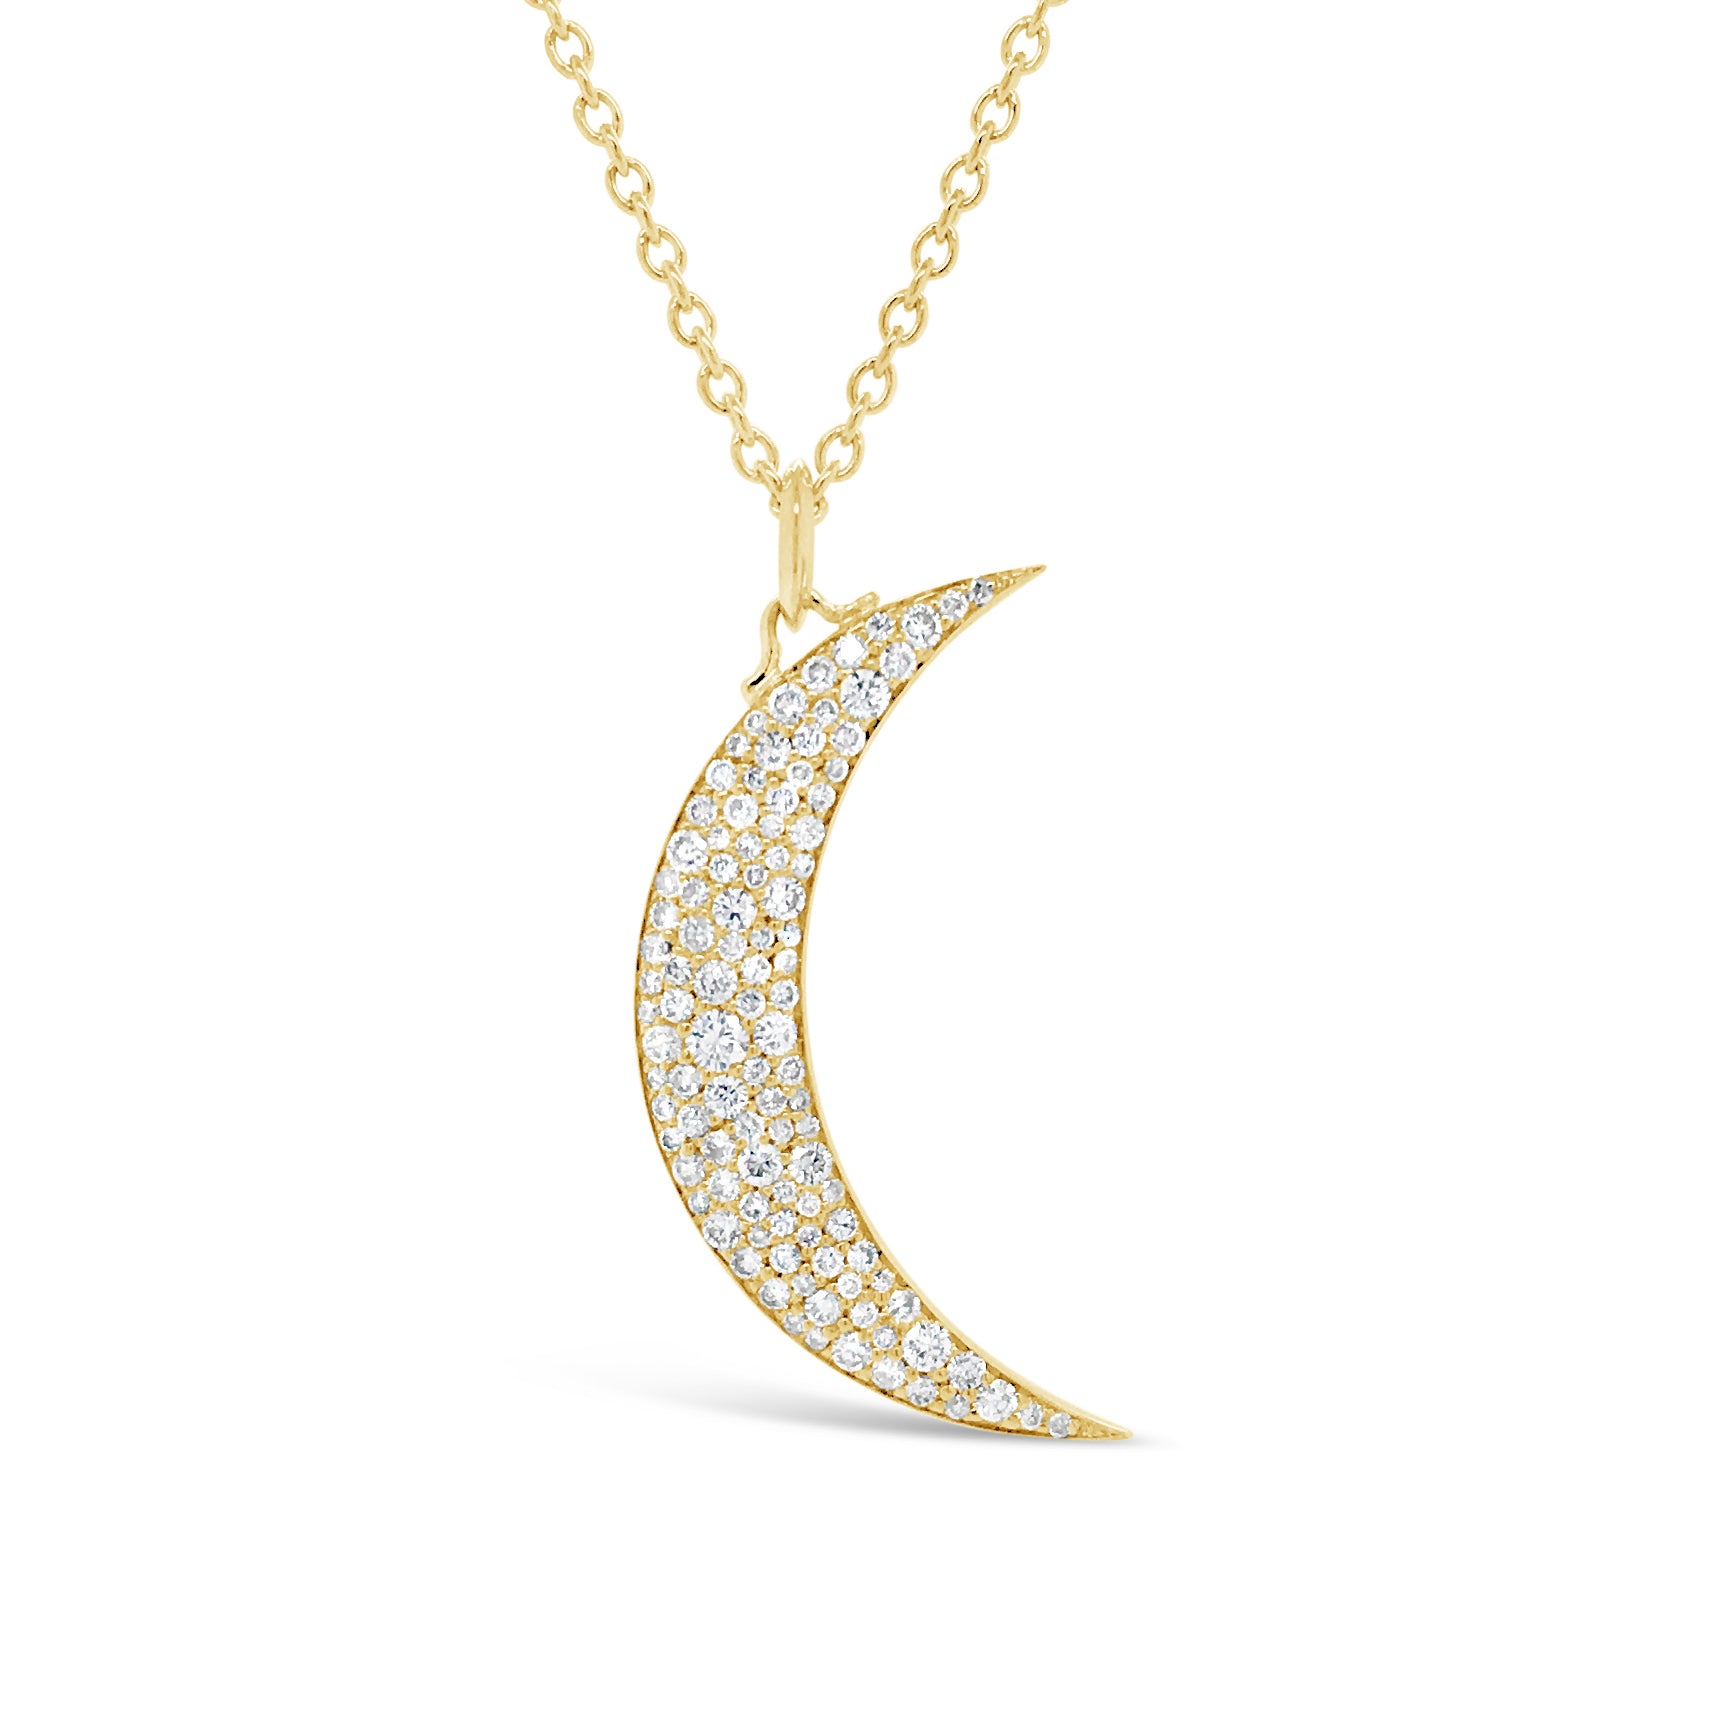 Pave Diamond Crescent Moon Pendant  -14K gold weighing 5.0 grams  -Round diamonds totaling 0.65 carats